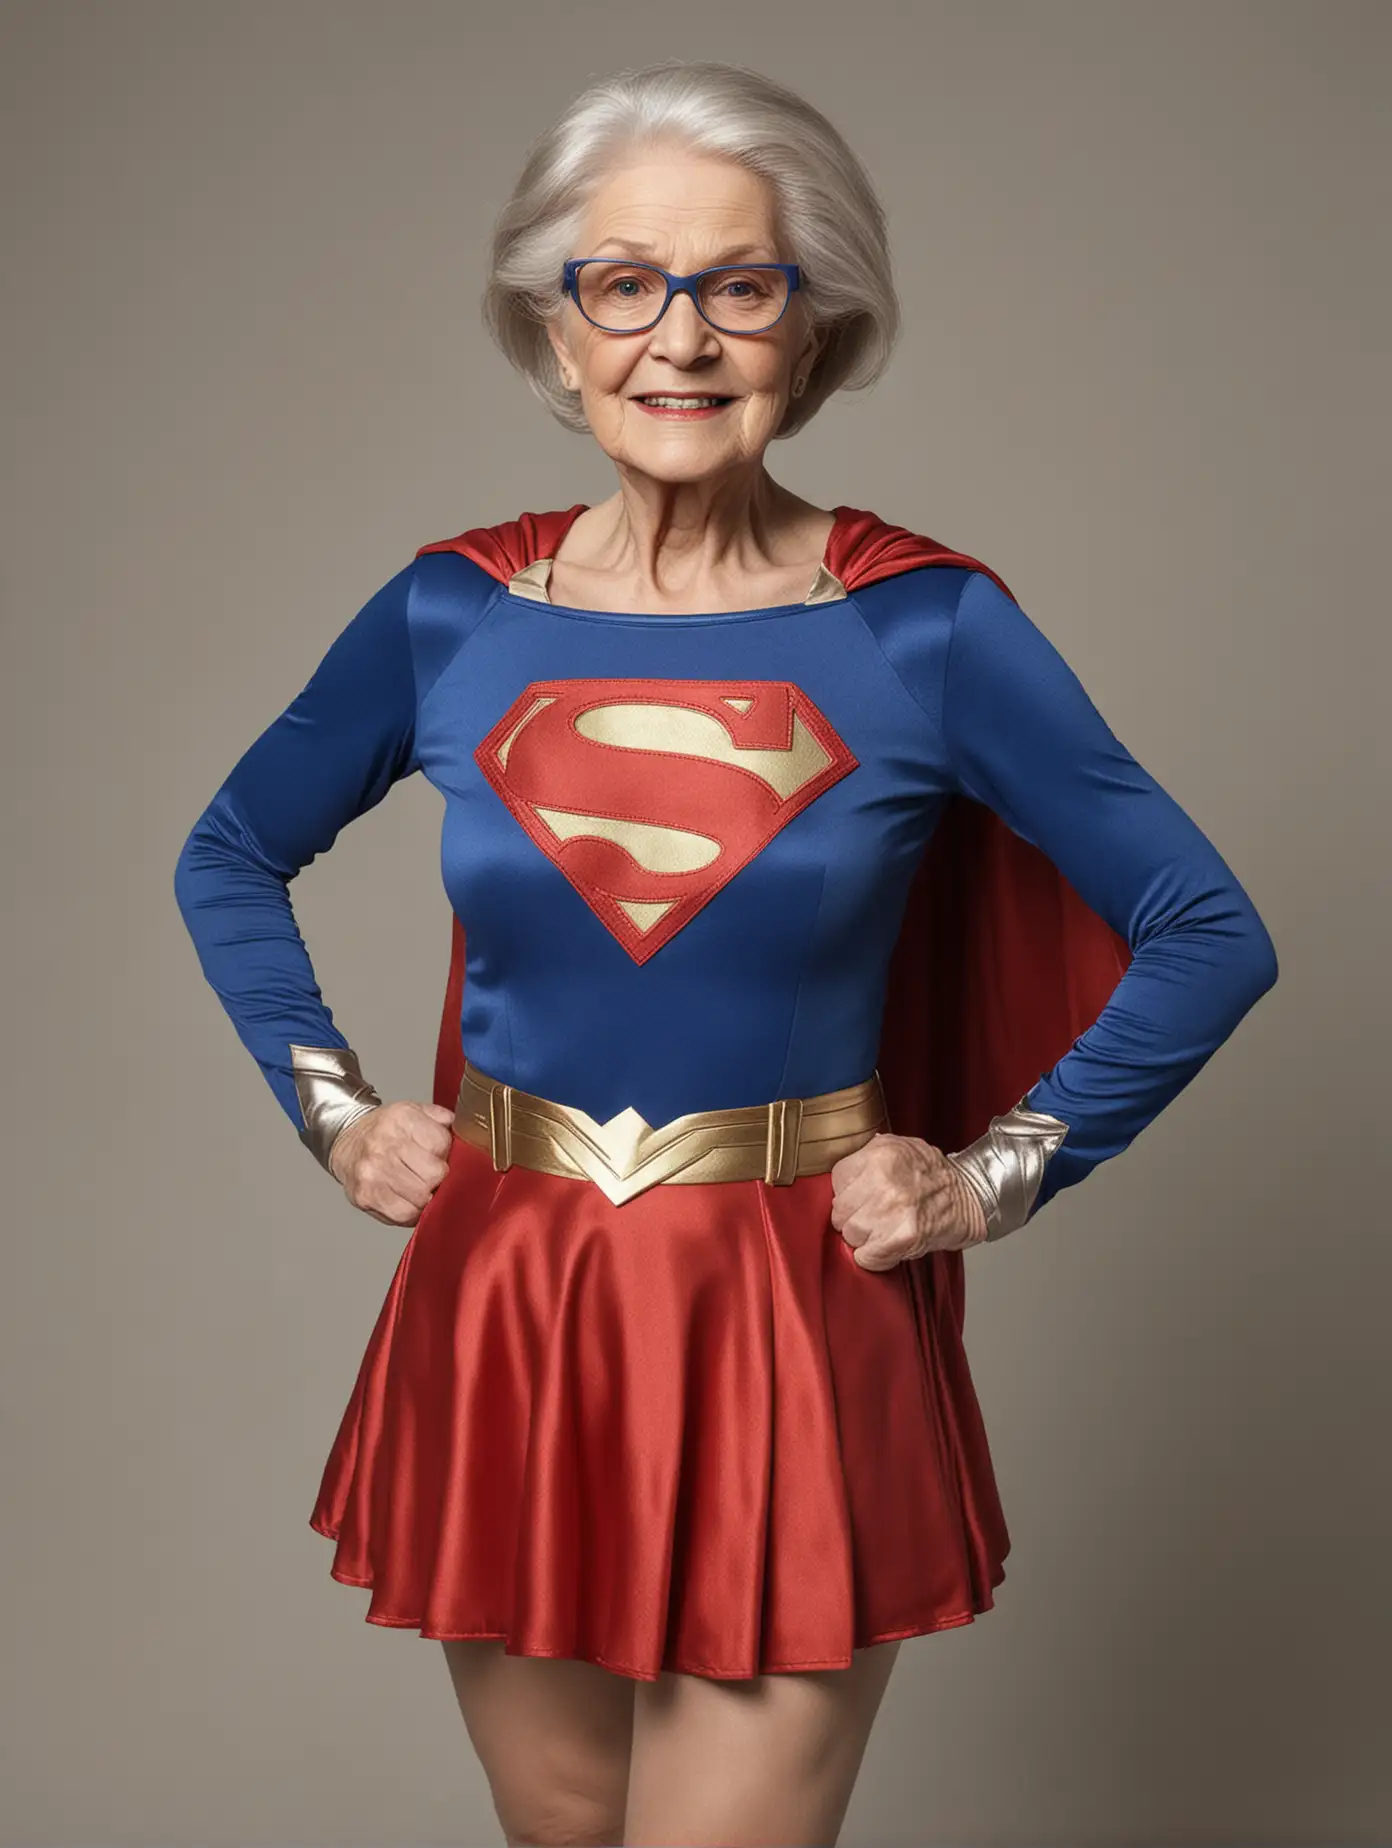 80 year old woman, wearing Supergirl costume